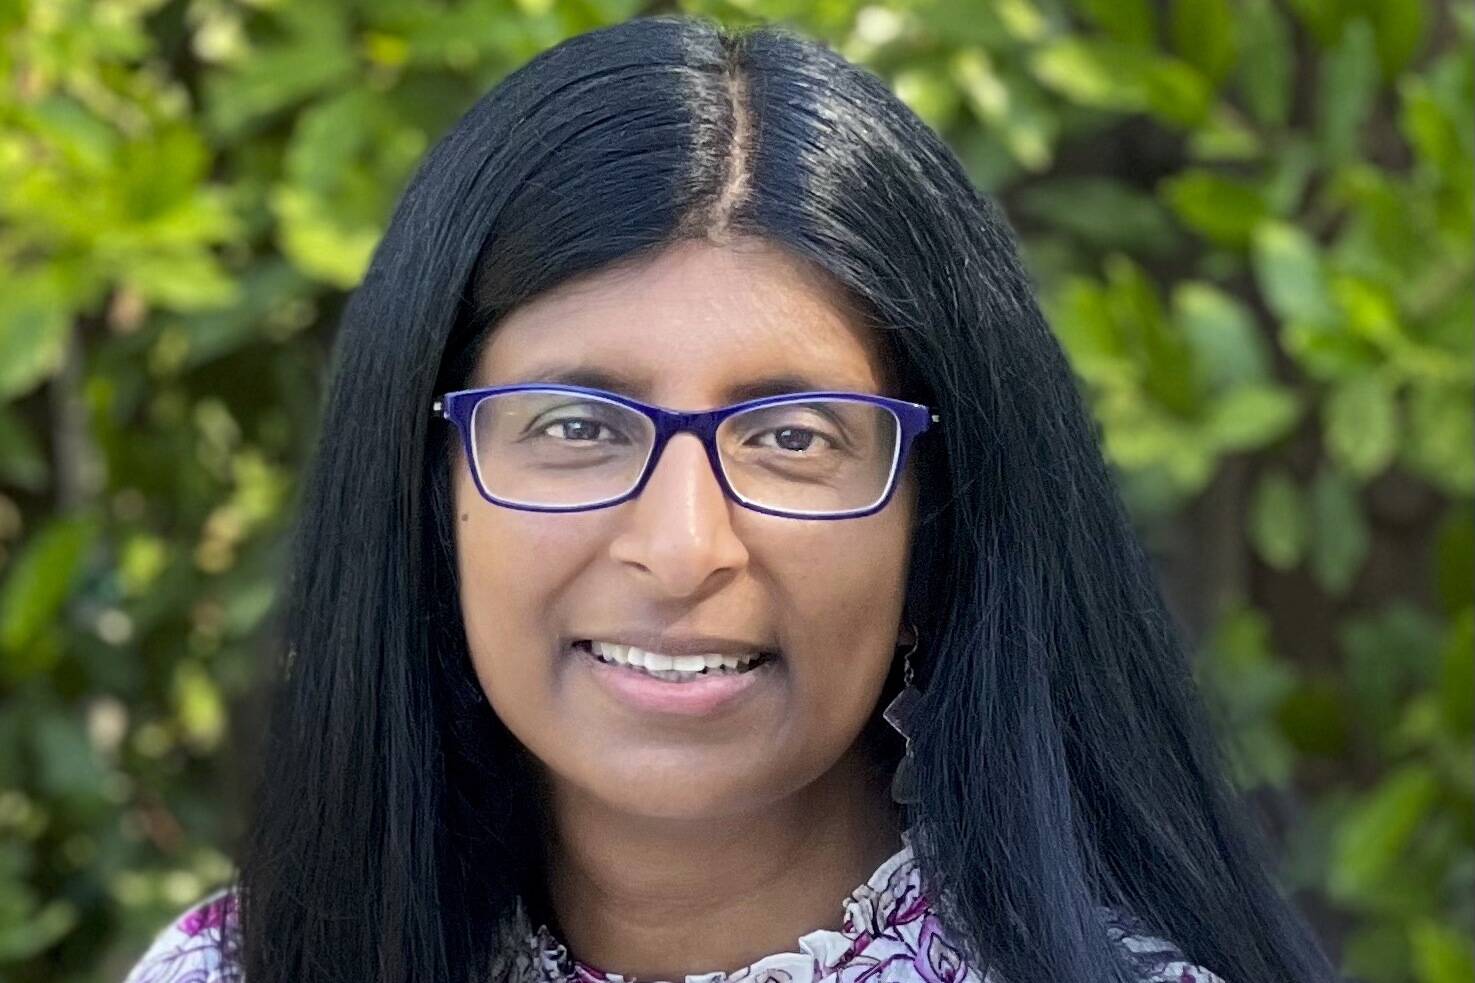 University of Alaska
Aparna Dileep-Nageswaran Palmer, shown in this photo, was recently selected to be new chancellor of the University of Alaska Southeast.